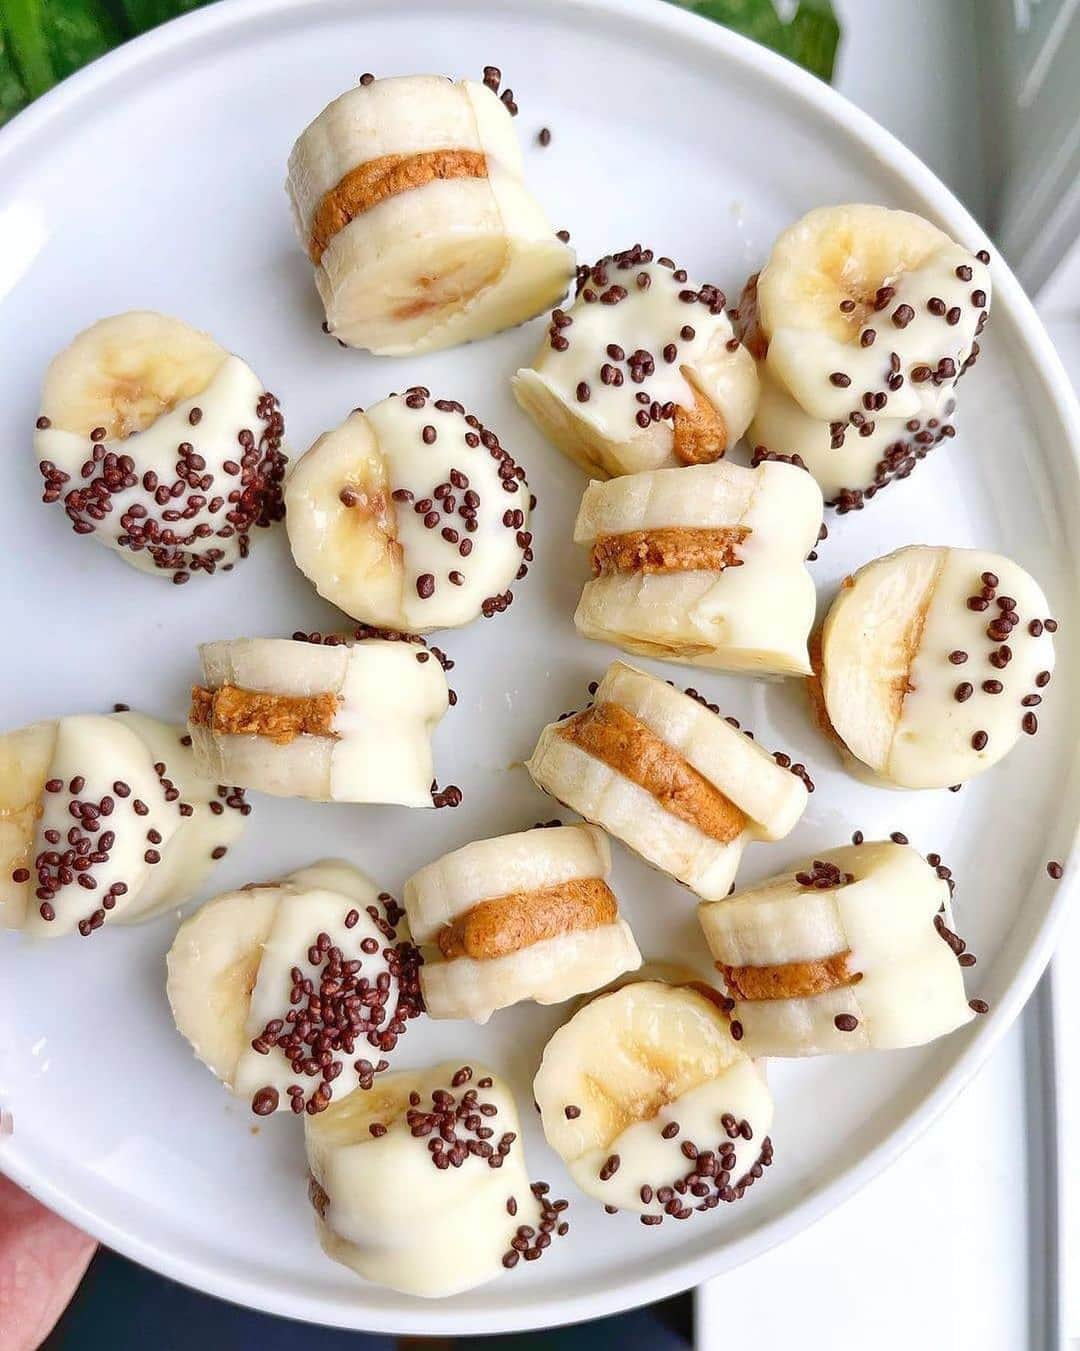 Sharing Healthy Snack Ideasのインスタグラム：「PROTEIN BANANA BITES 😍🍌💪🏻🍫 by @erinliveswhole  - For these just cut up three bananas into coins and lay them on a parchment lined baking sheet. then mix 1/2 cup pb and 1/4 cup protein powder (any flavor of choice) add pb mixture to one side of banana coin and top with another banana coin. freeze 1 hour. then melt 1/2 cup white chocolate chips with 1 tsp coconut oil in the microwave. dip half in, sprinkle with chocolate chia seeds (optional), and freeze at least 30 min! store in freezer or fridge. ENJOY AND HAPPY WEEKEND EVERYONE! ♥️ .」